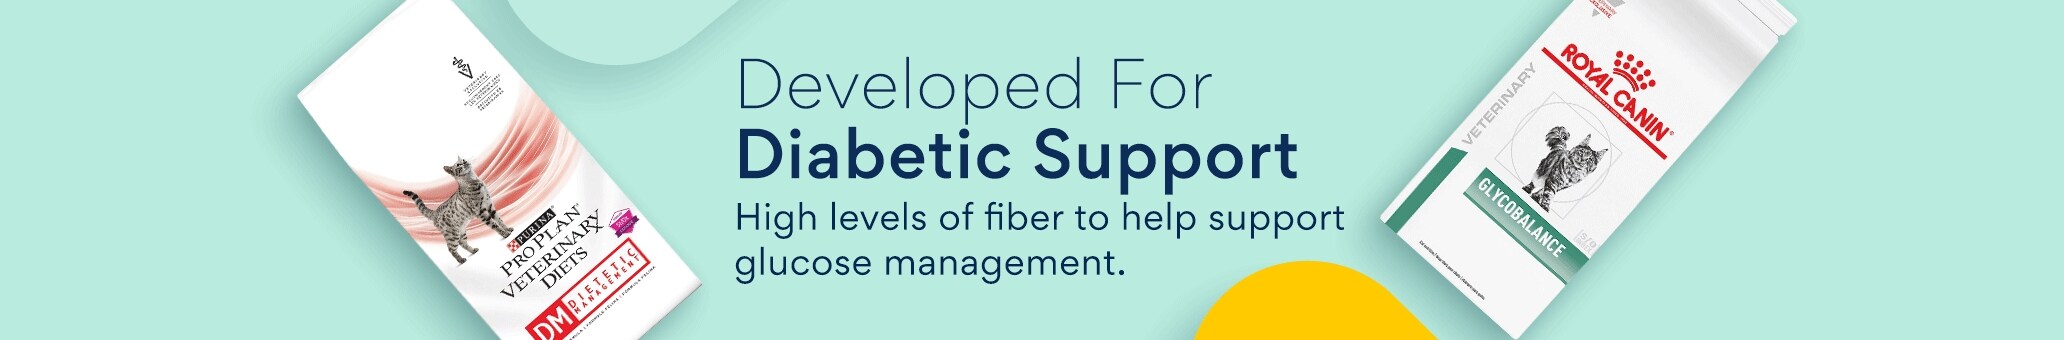 Developed For Diabetic Support. High levels of fiber to help support glucose management.